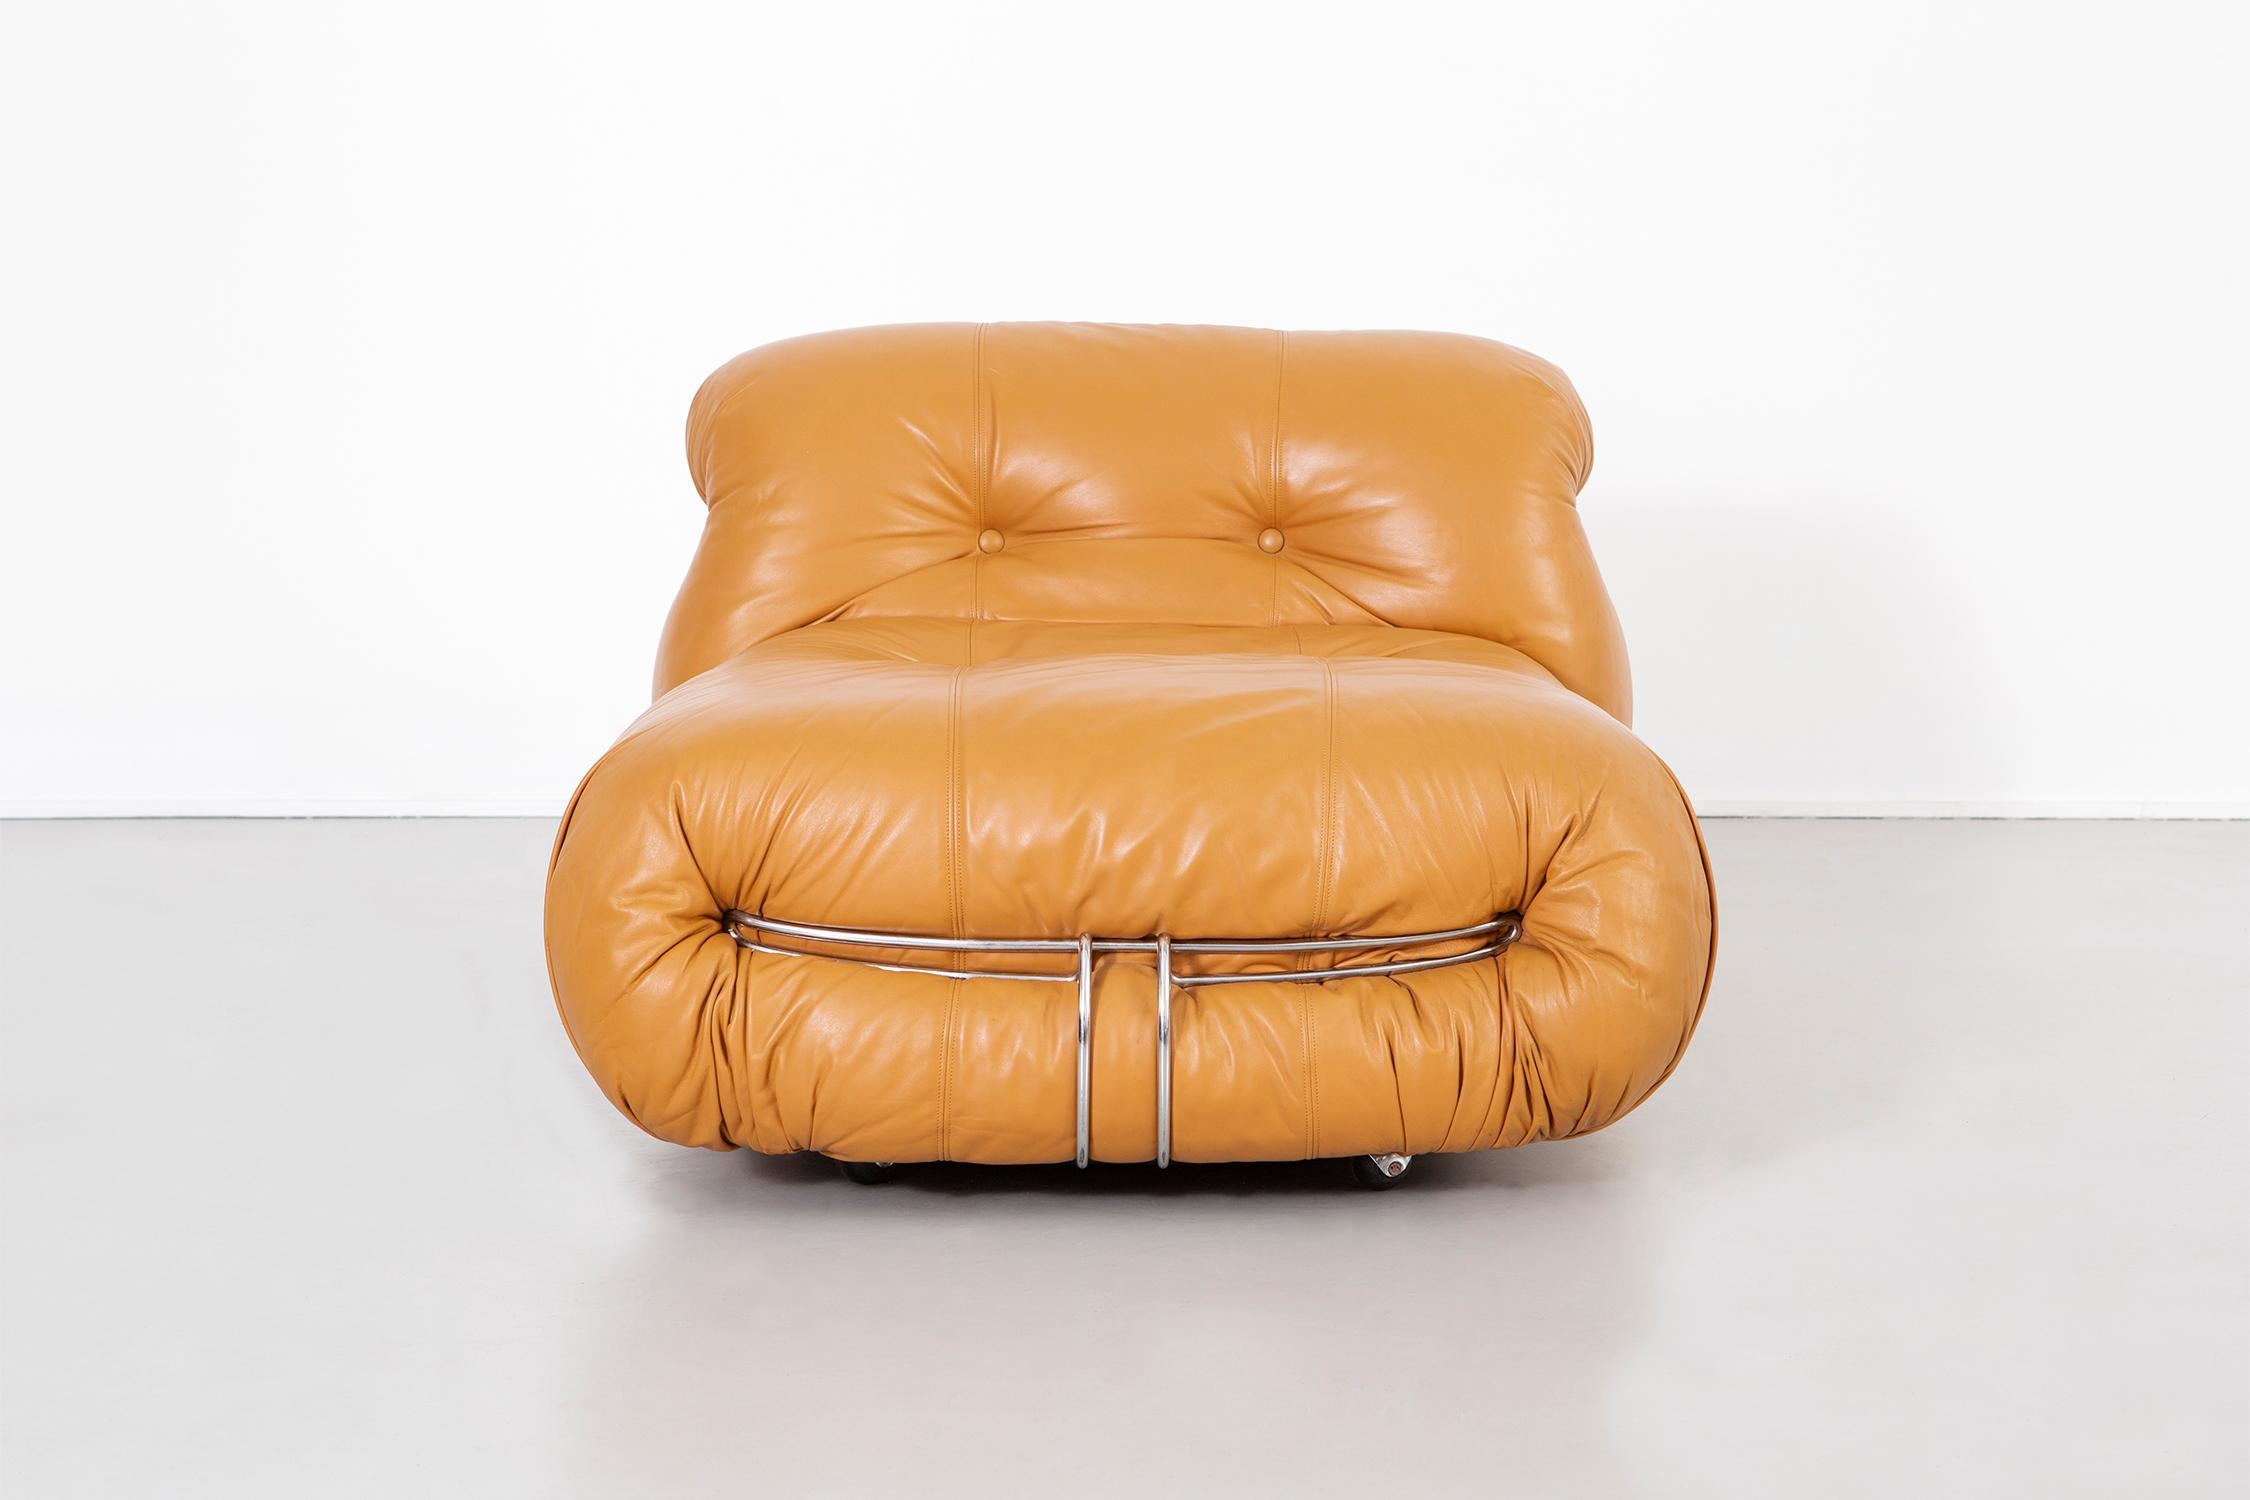 Soriana lounge chair

designed by Tobia Scarpa for Cassina

Italy, circa 1970s.

This chair retains its original leather in beautiful condition. 

Measures: 24 ¾” H x 33 ½” W x 47 ½” D x seat 15” H.